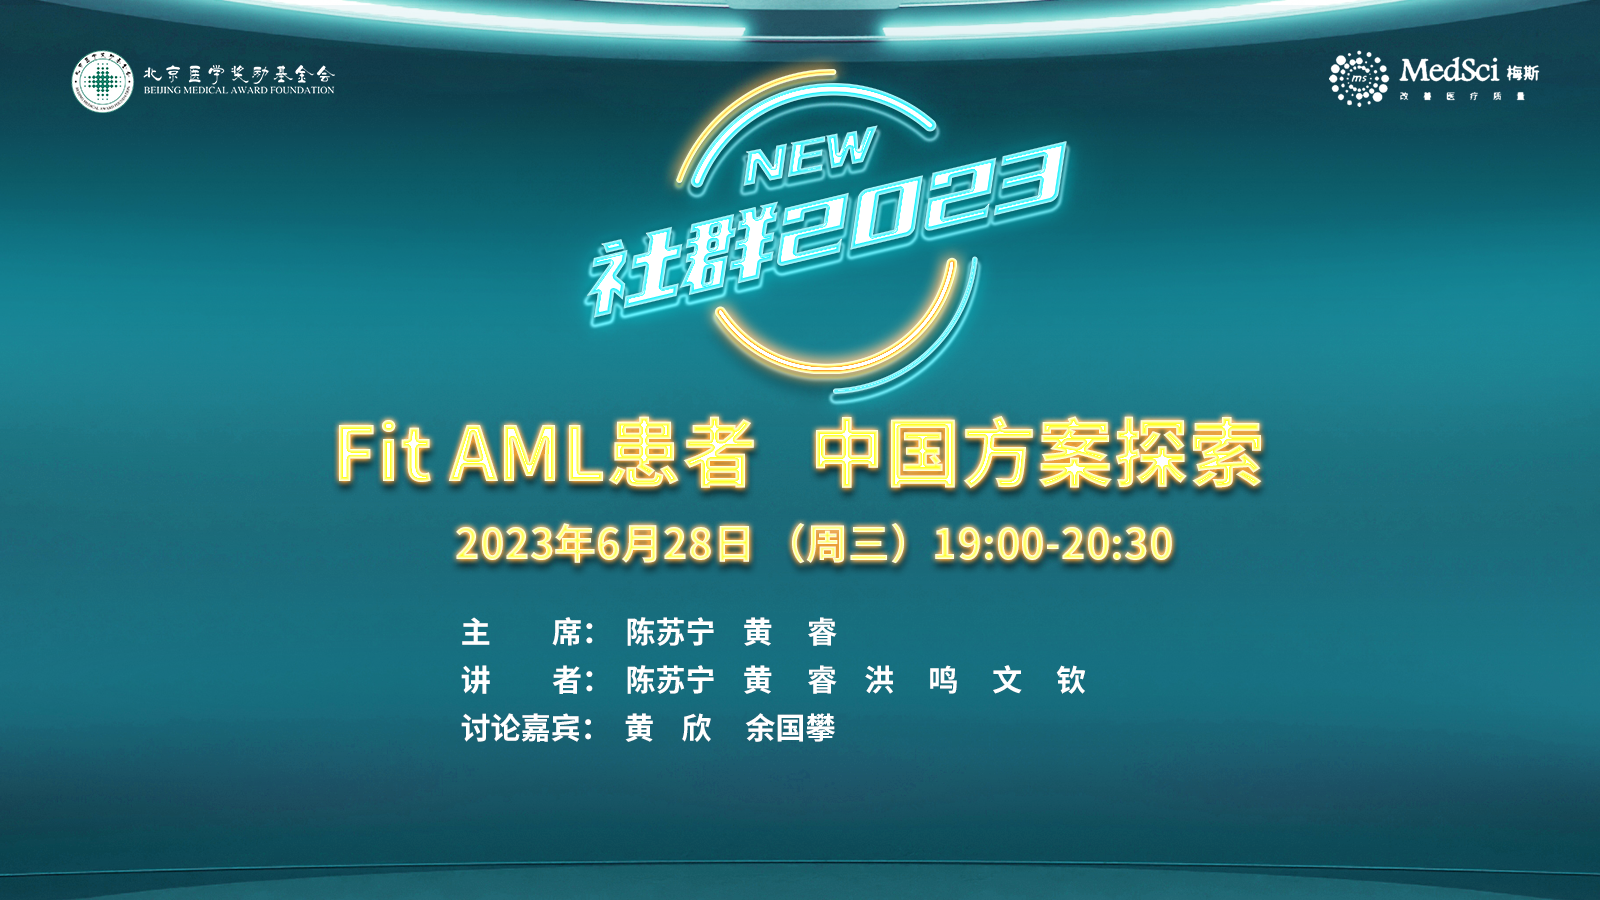 Fit AML患者<font color="red">中国</font><font color="red">方案</font>探索